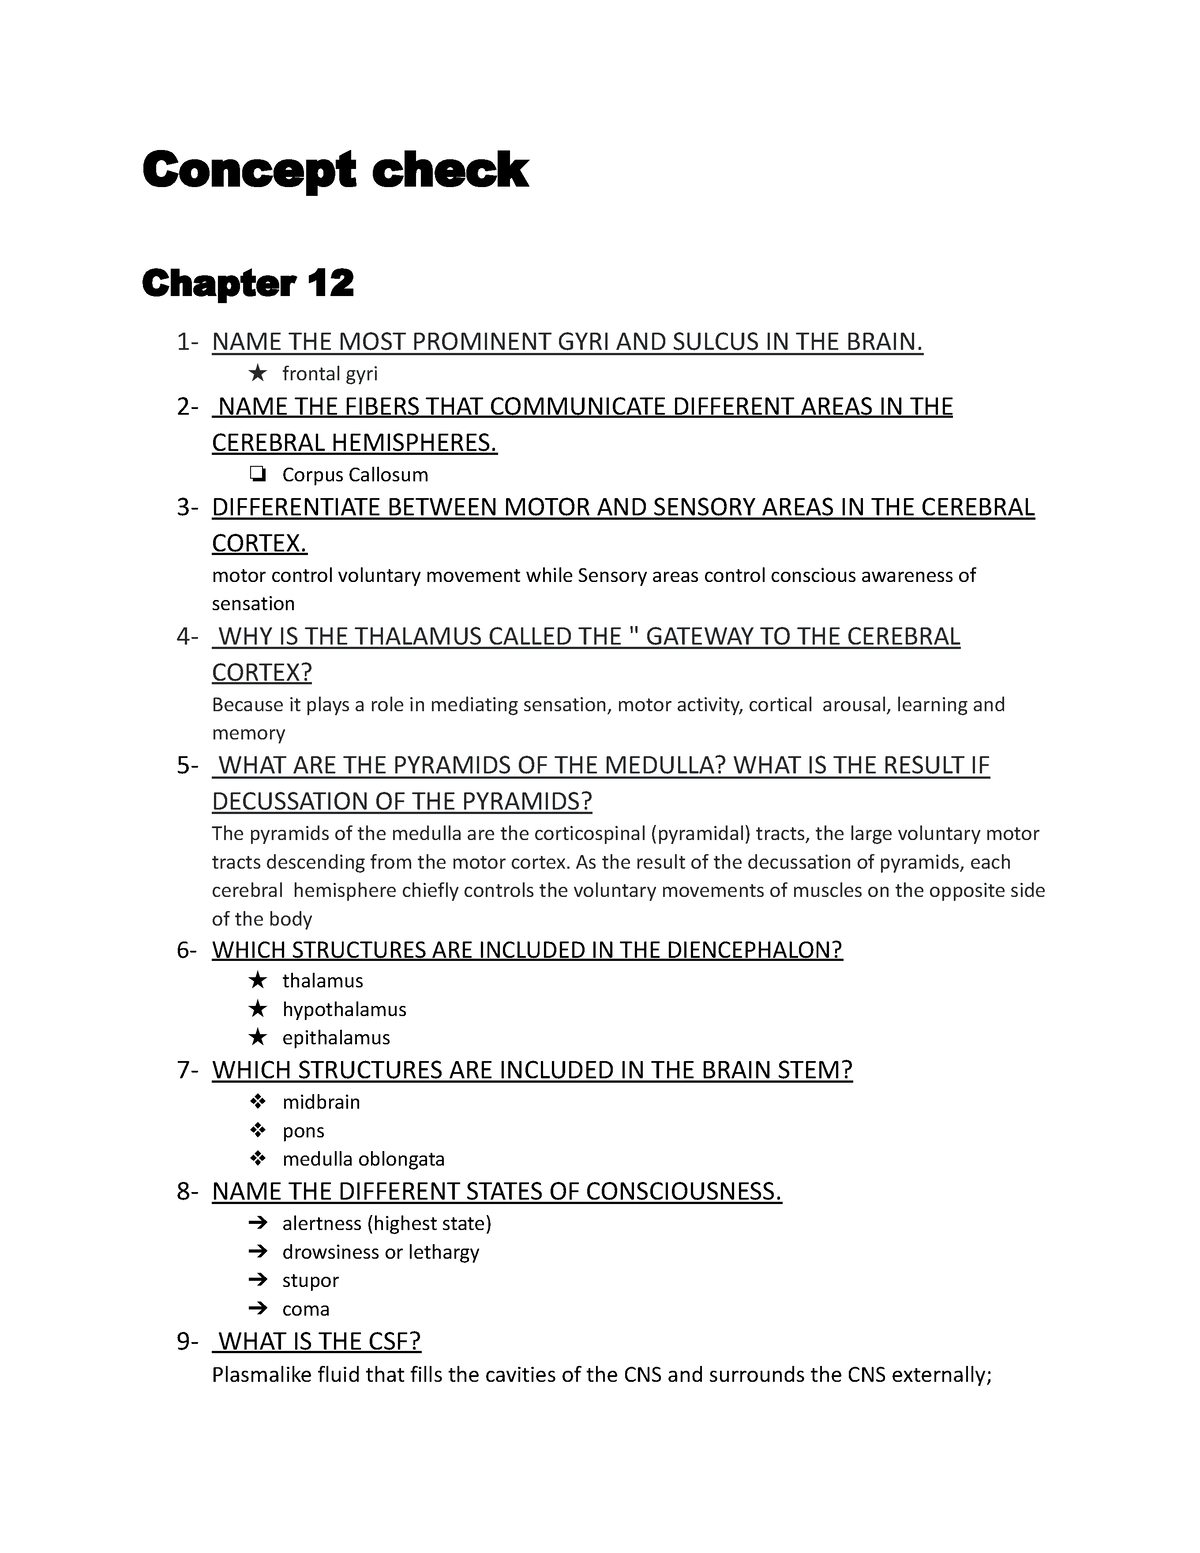 assignment chapter 12 concept check quiz